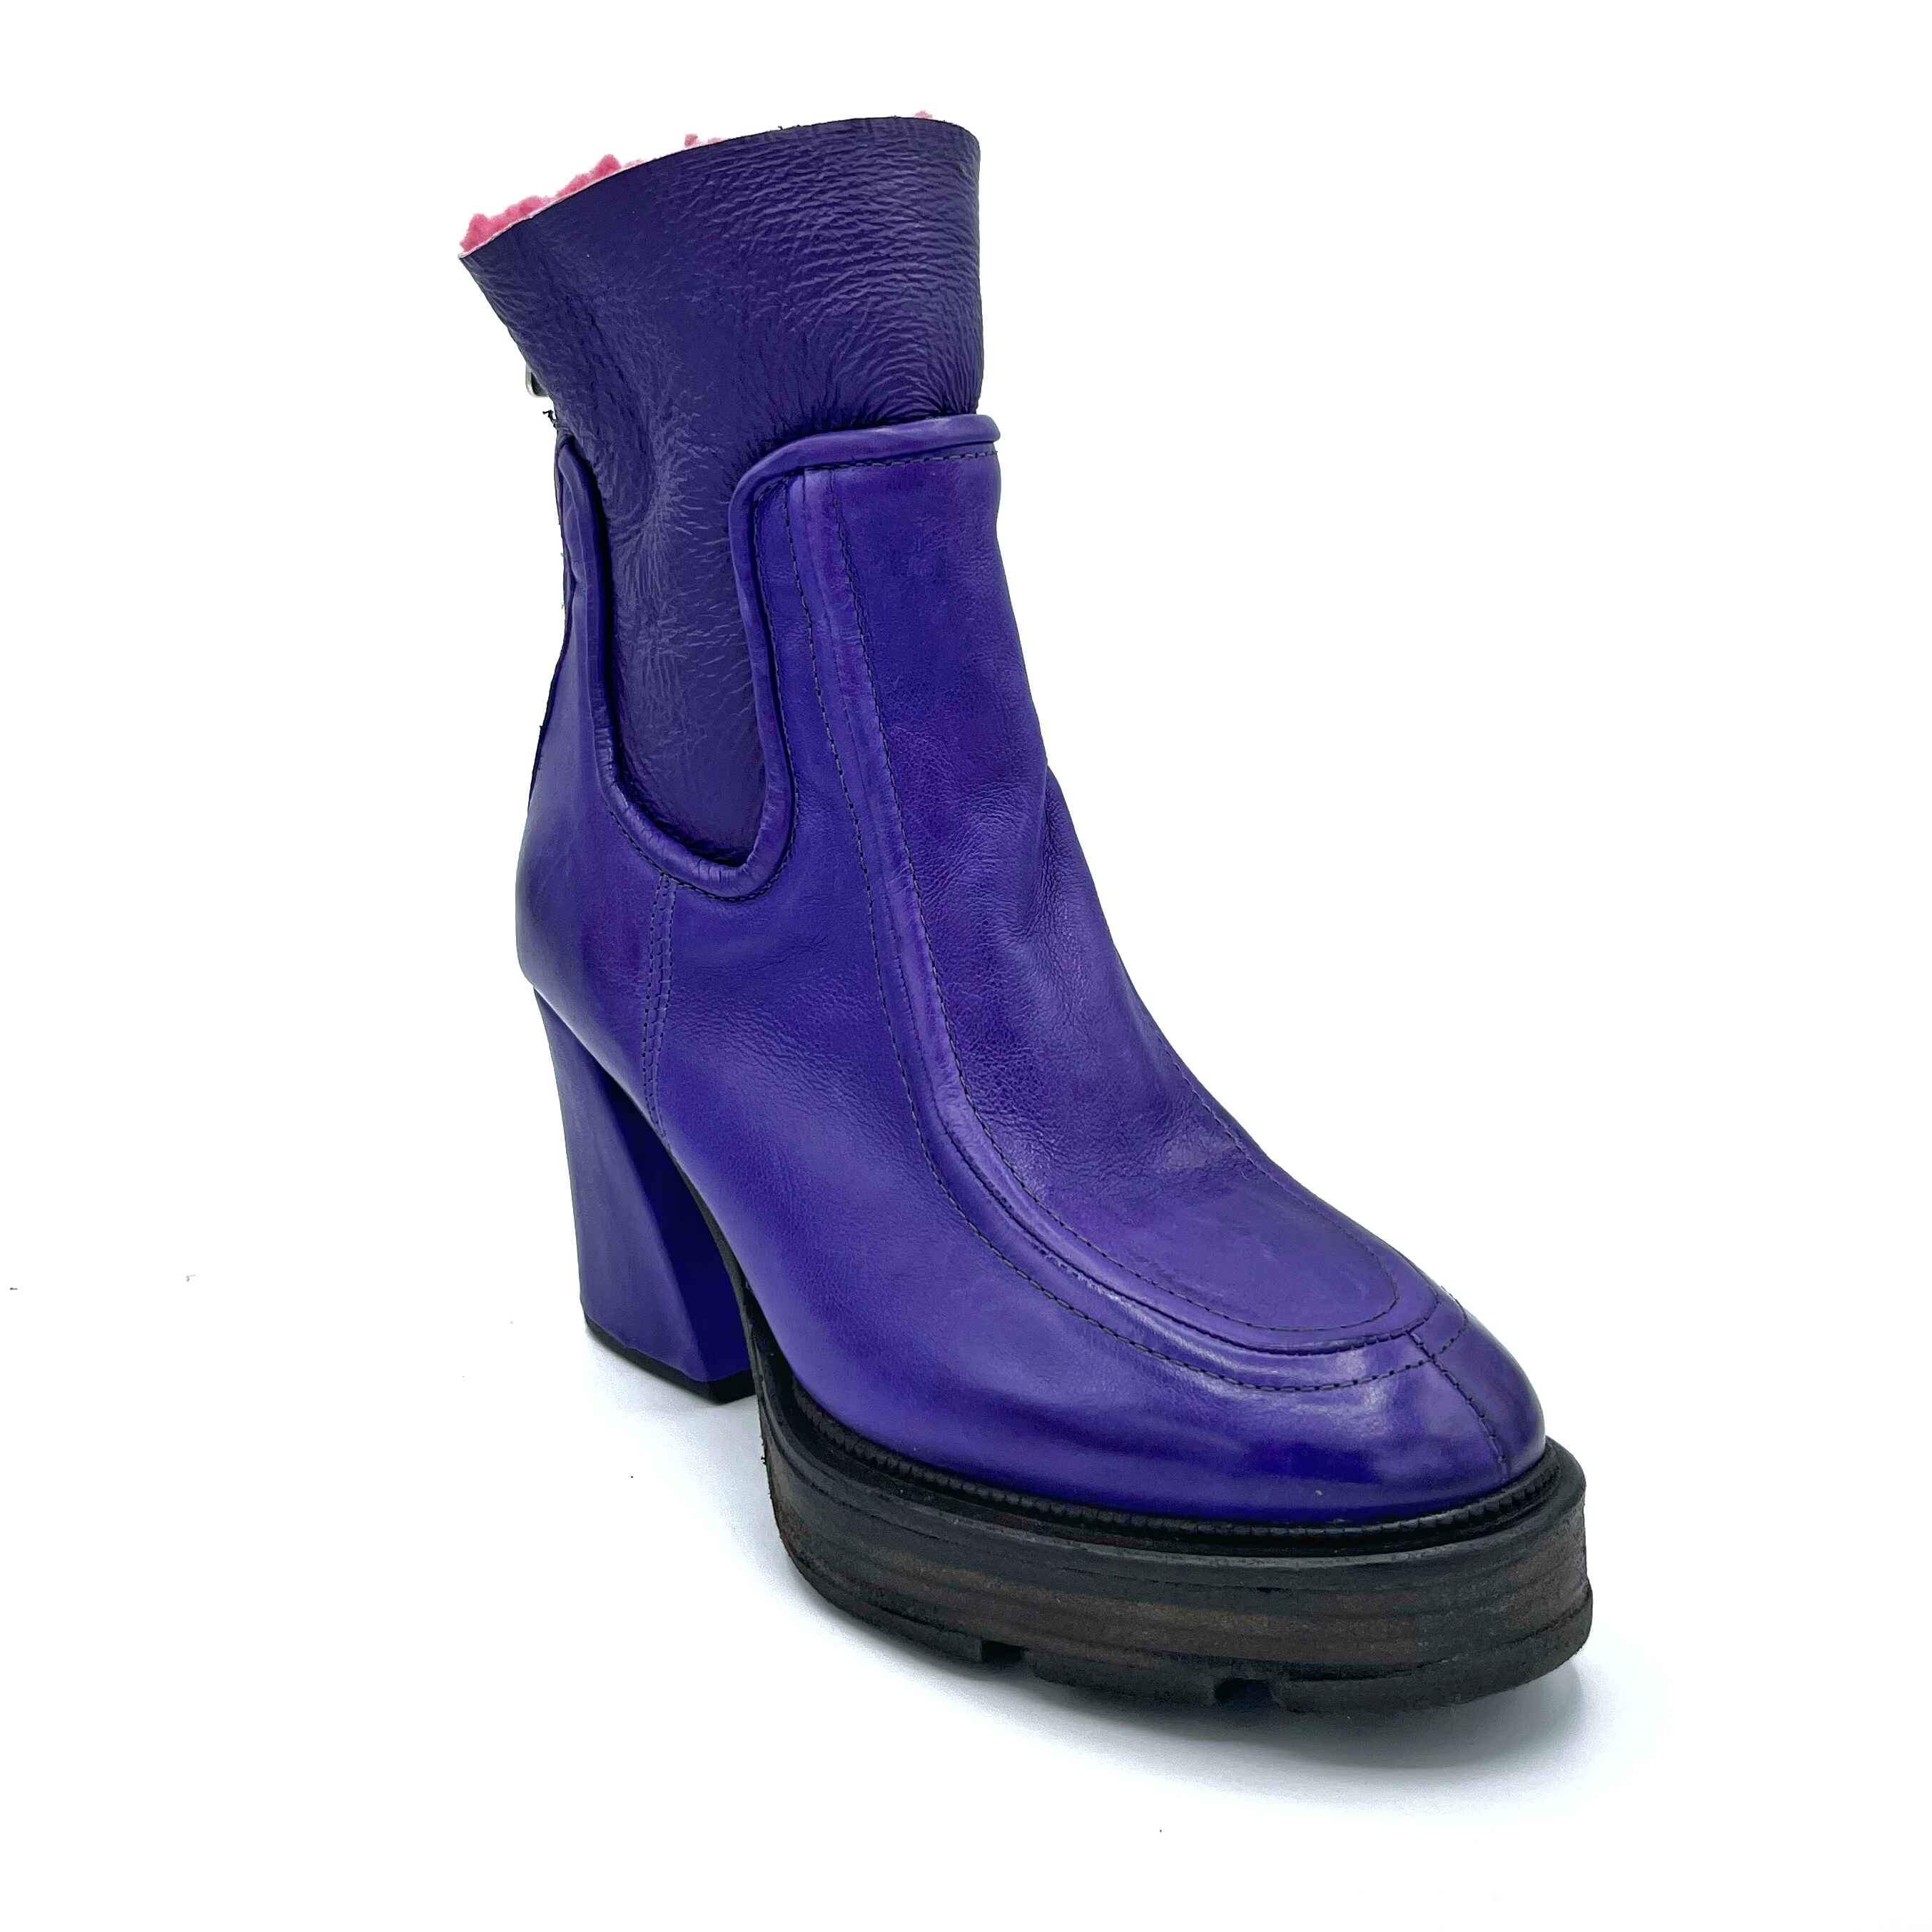 outer front side view of the A.S.98 Linkin Fur Boot in toxic. This boot is purple on the outside with pink sherpa lining. The boot has a high heel and almond toe.